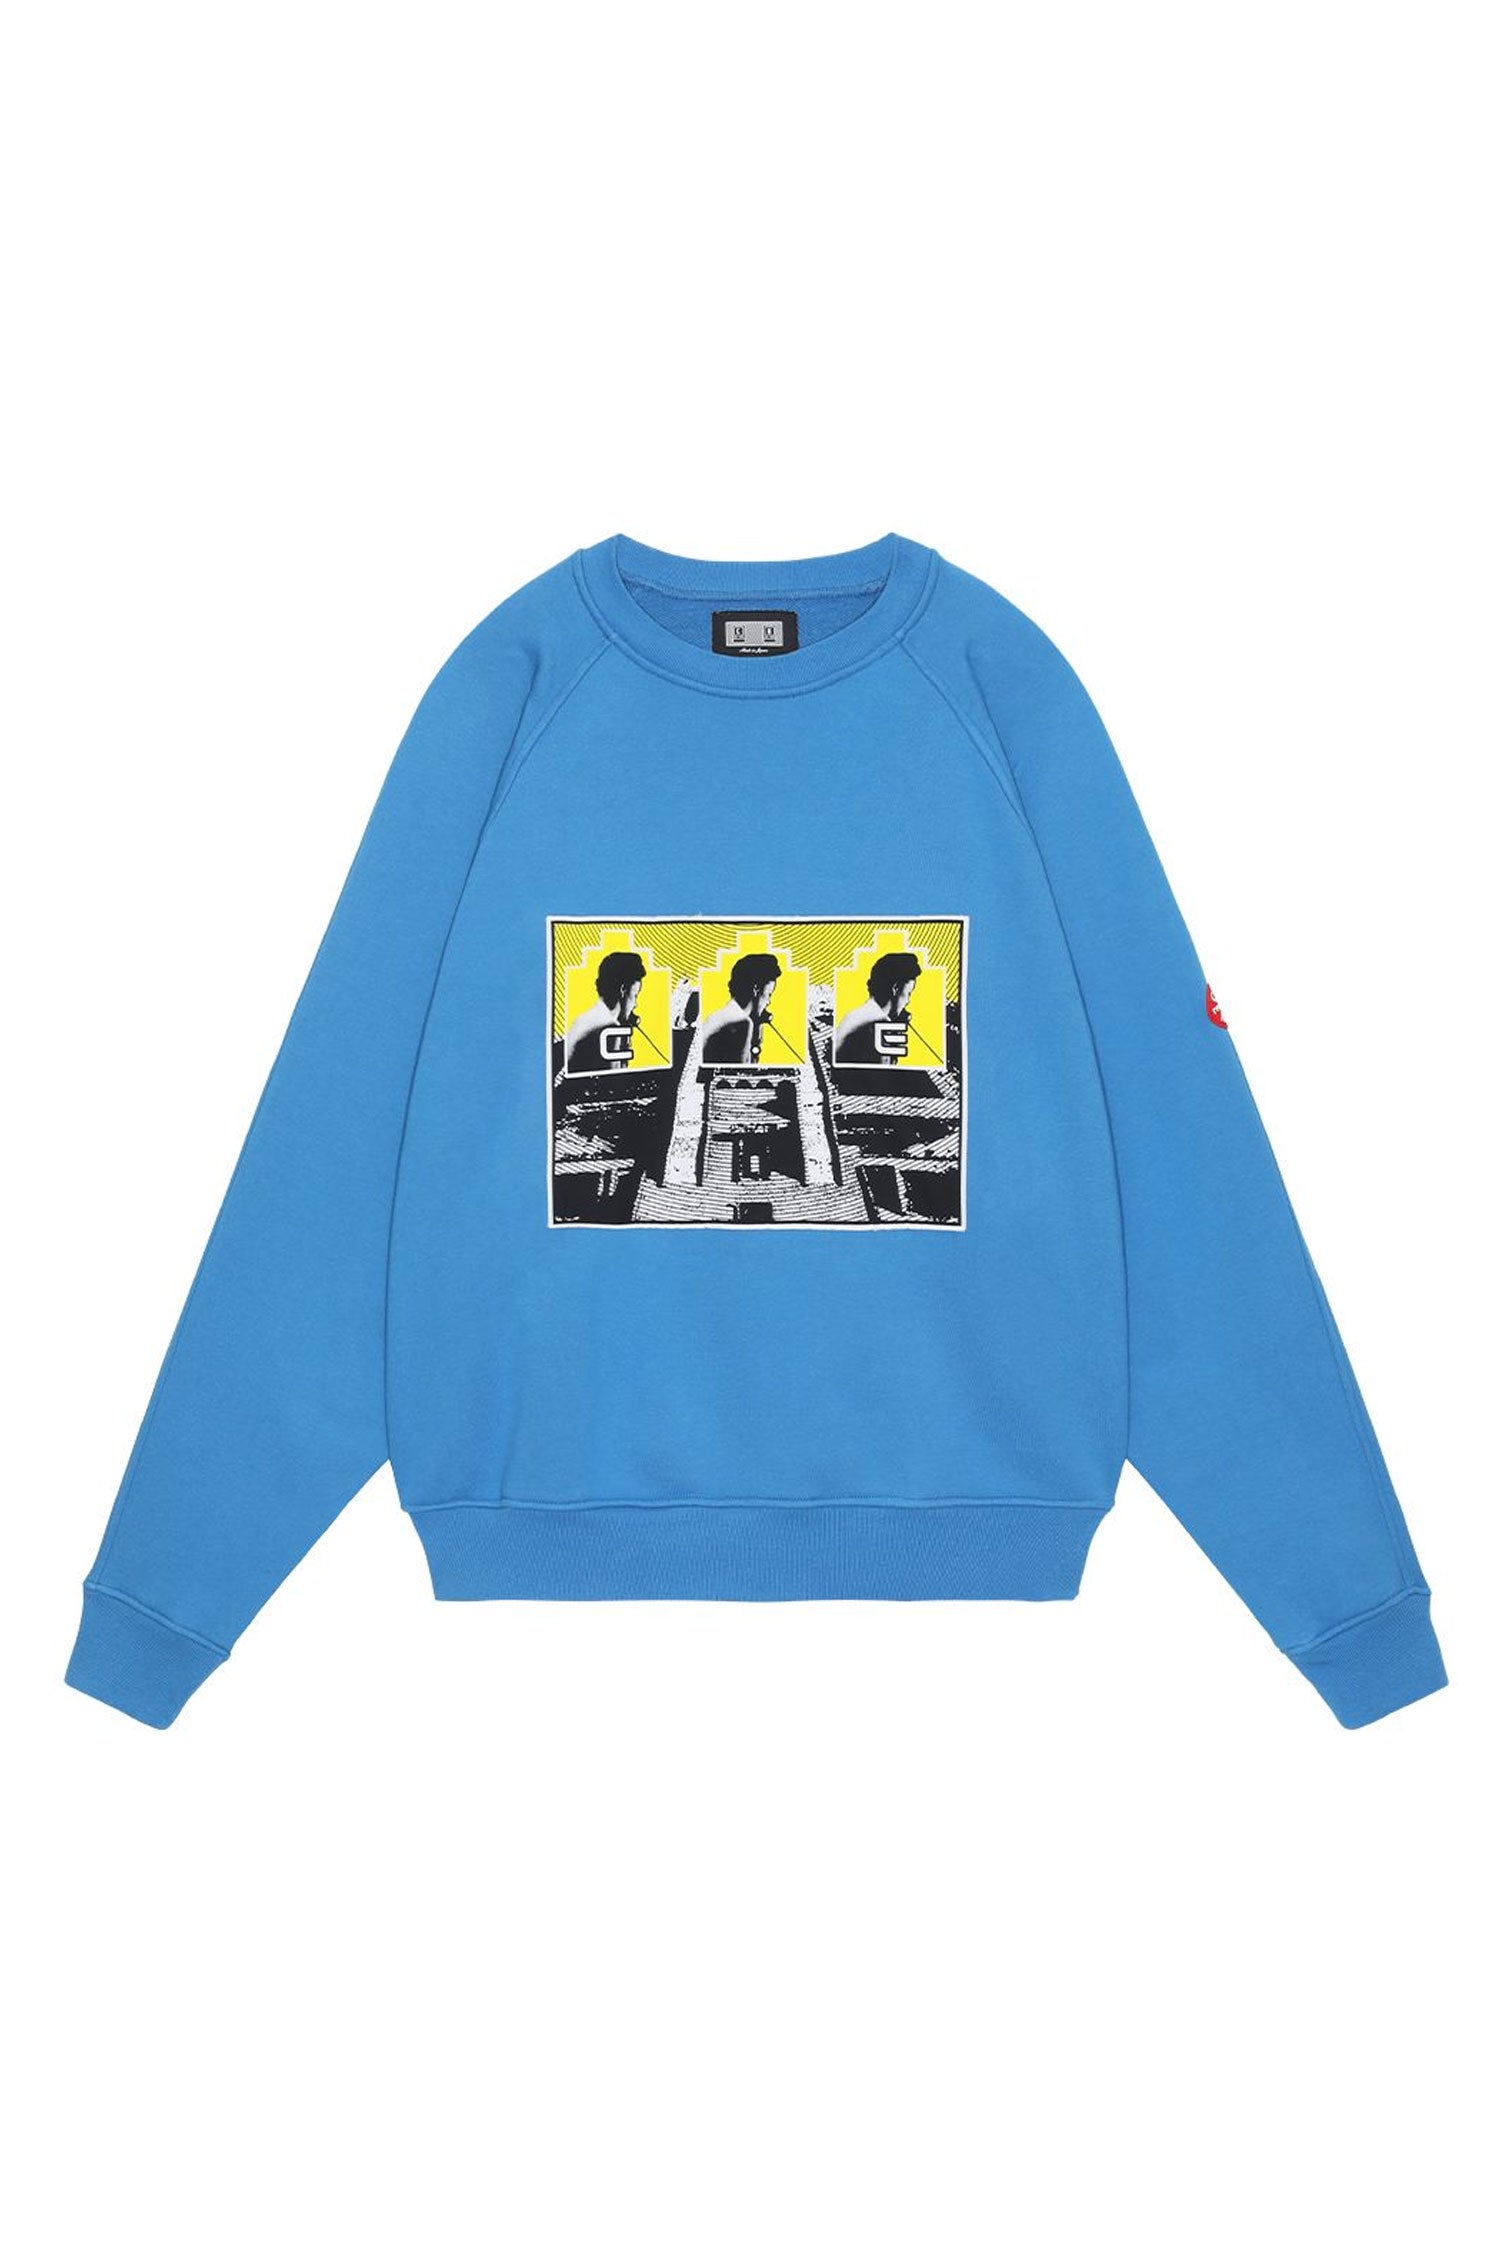 The CAV EMPT - TRANSMISSION BIG CREW NECK  available online with global shipping, and in PAM Stores Melbourne and Sydney.